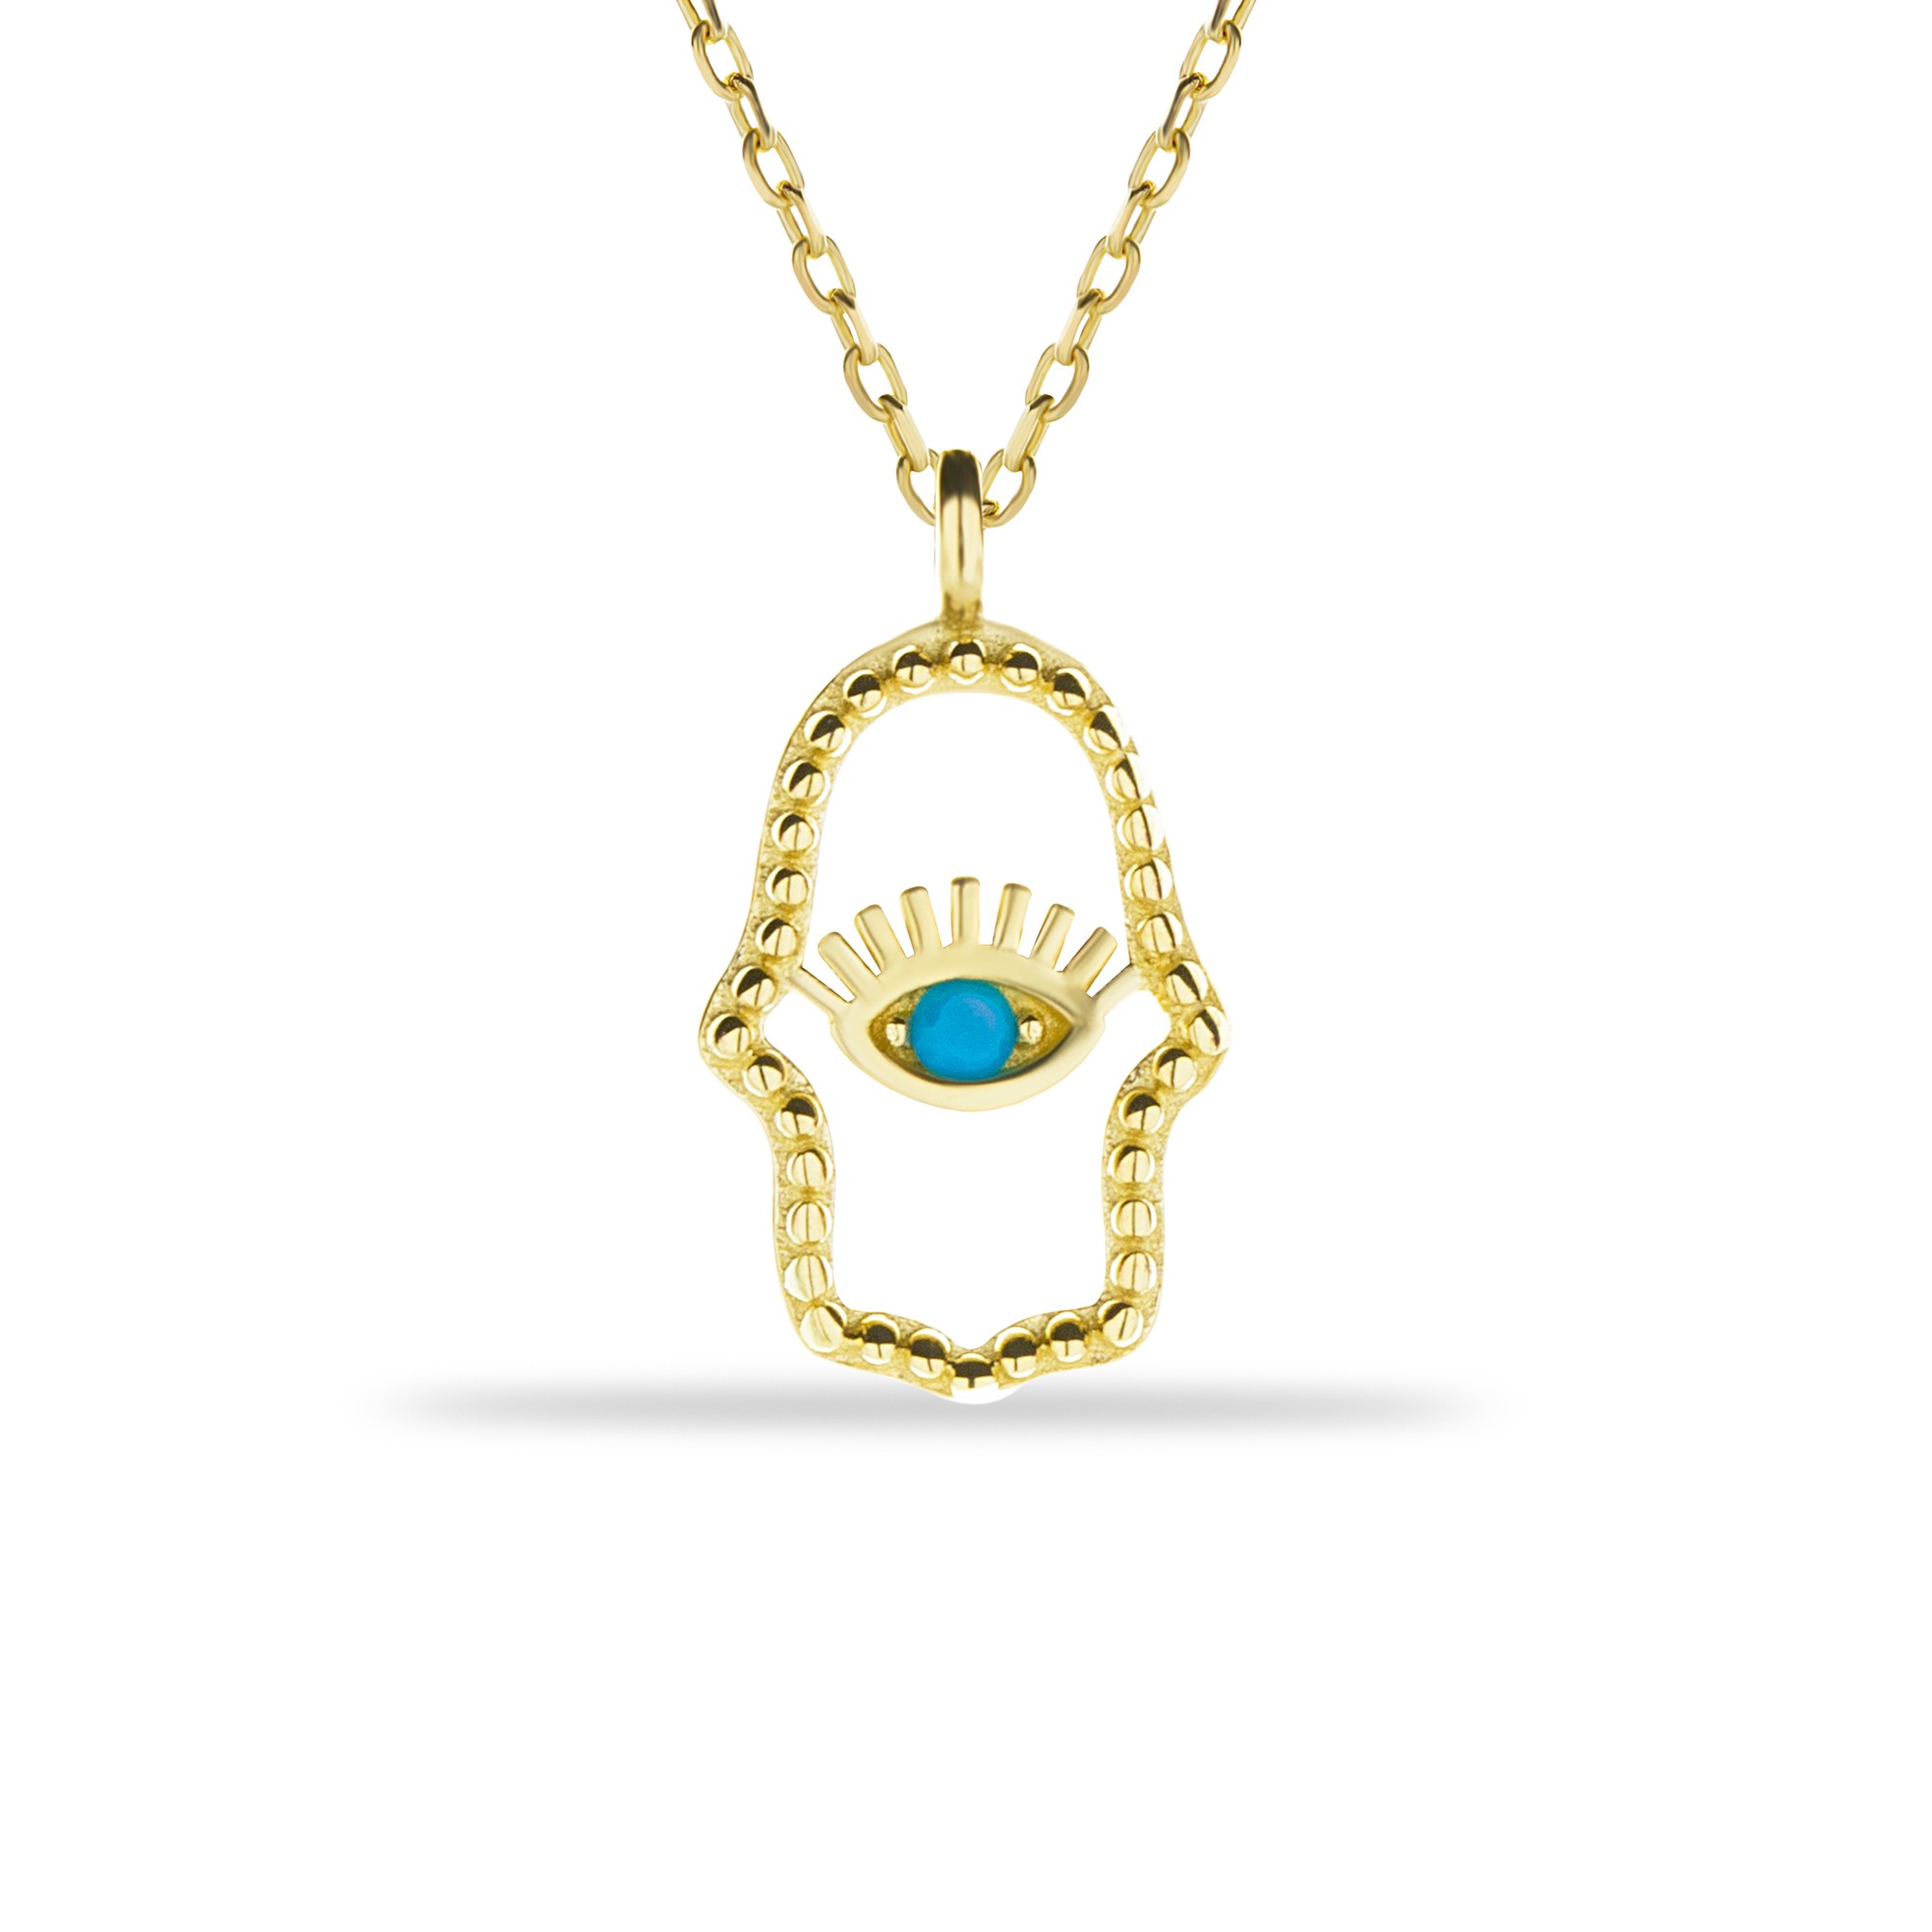  14 Carat Gold Fatima's Hand Necklace with  Eye Detail 